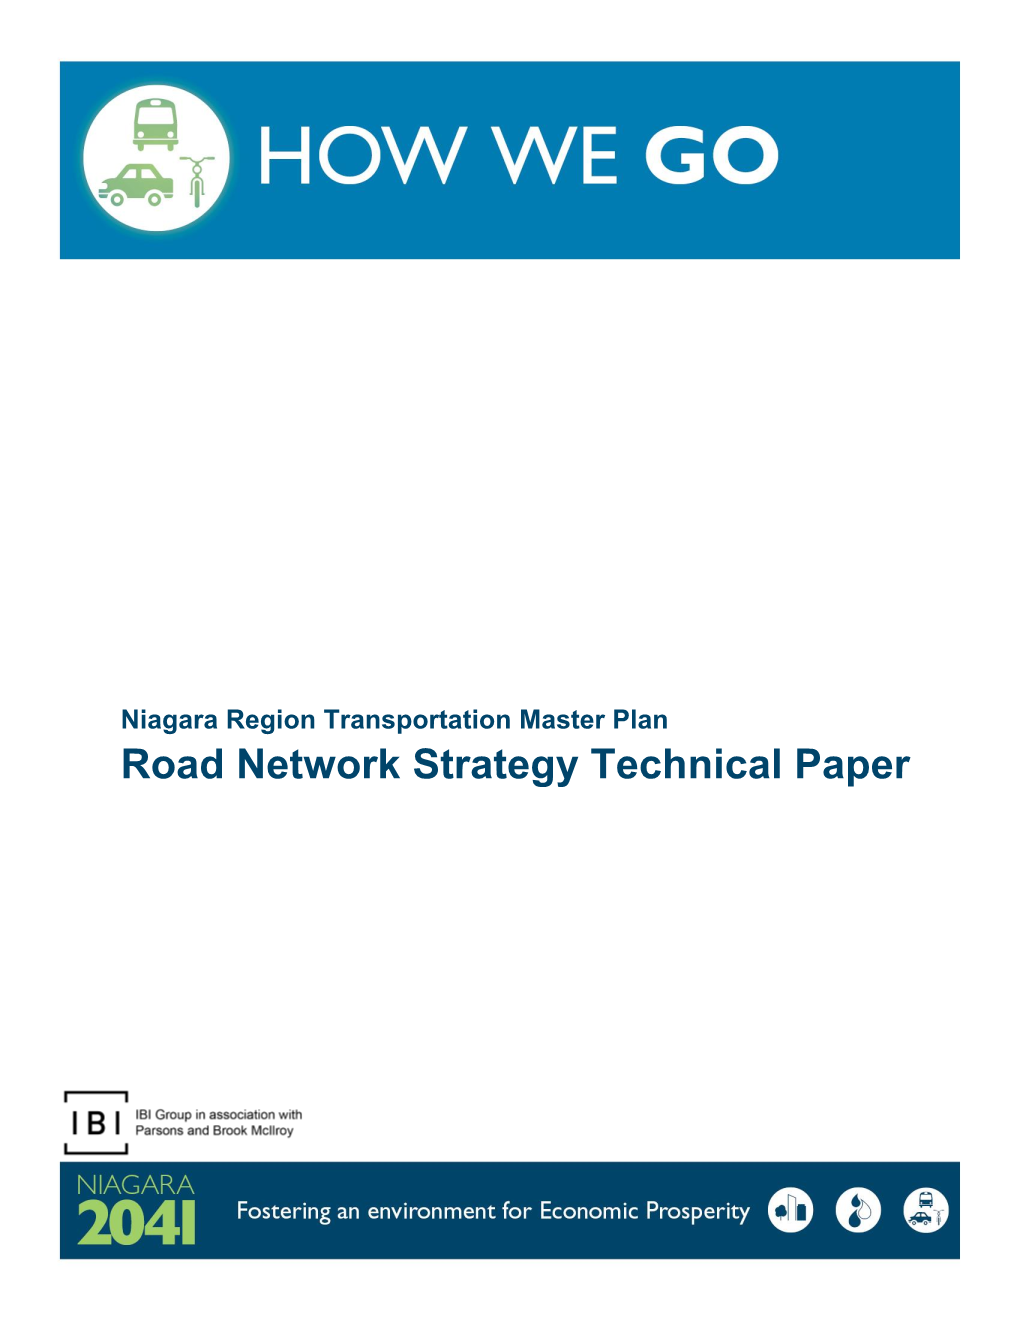 Road Strategy Technical Paper